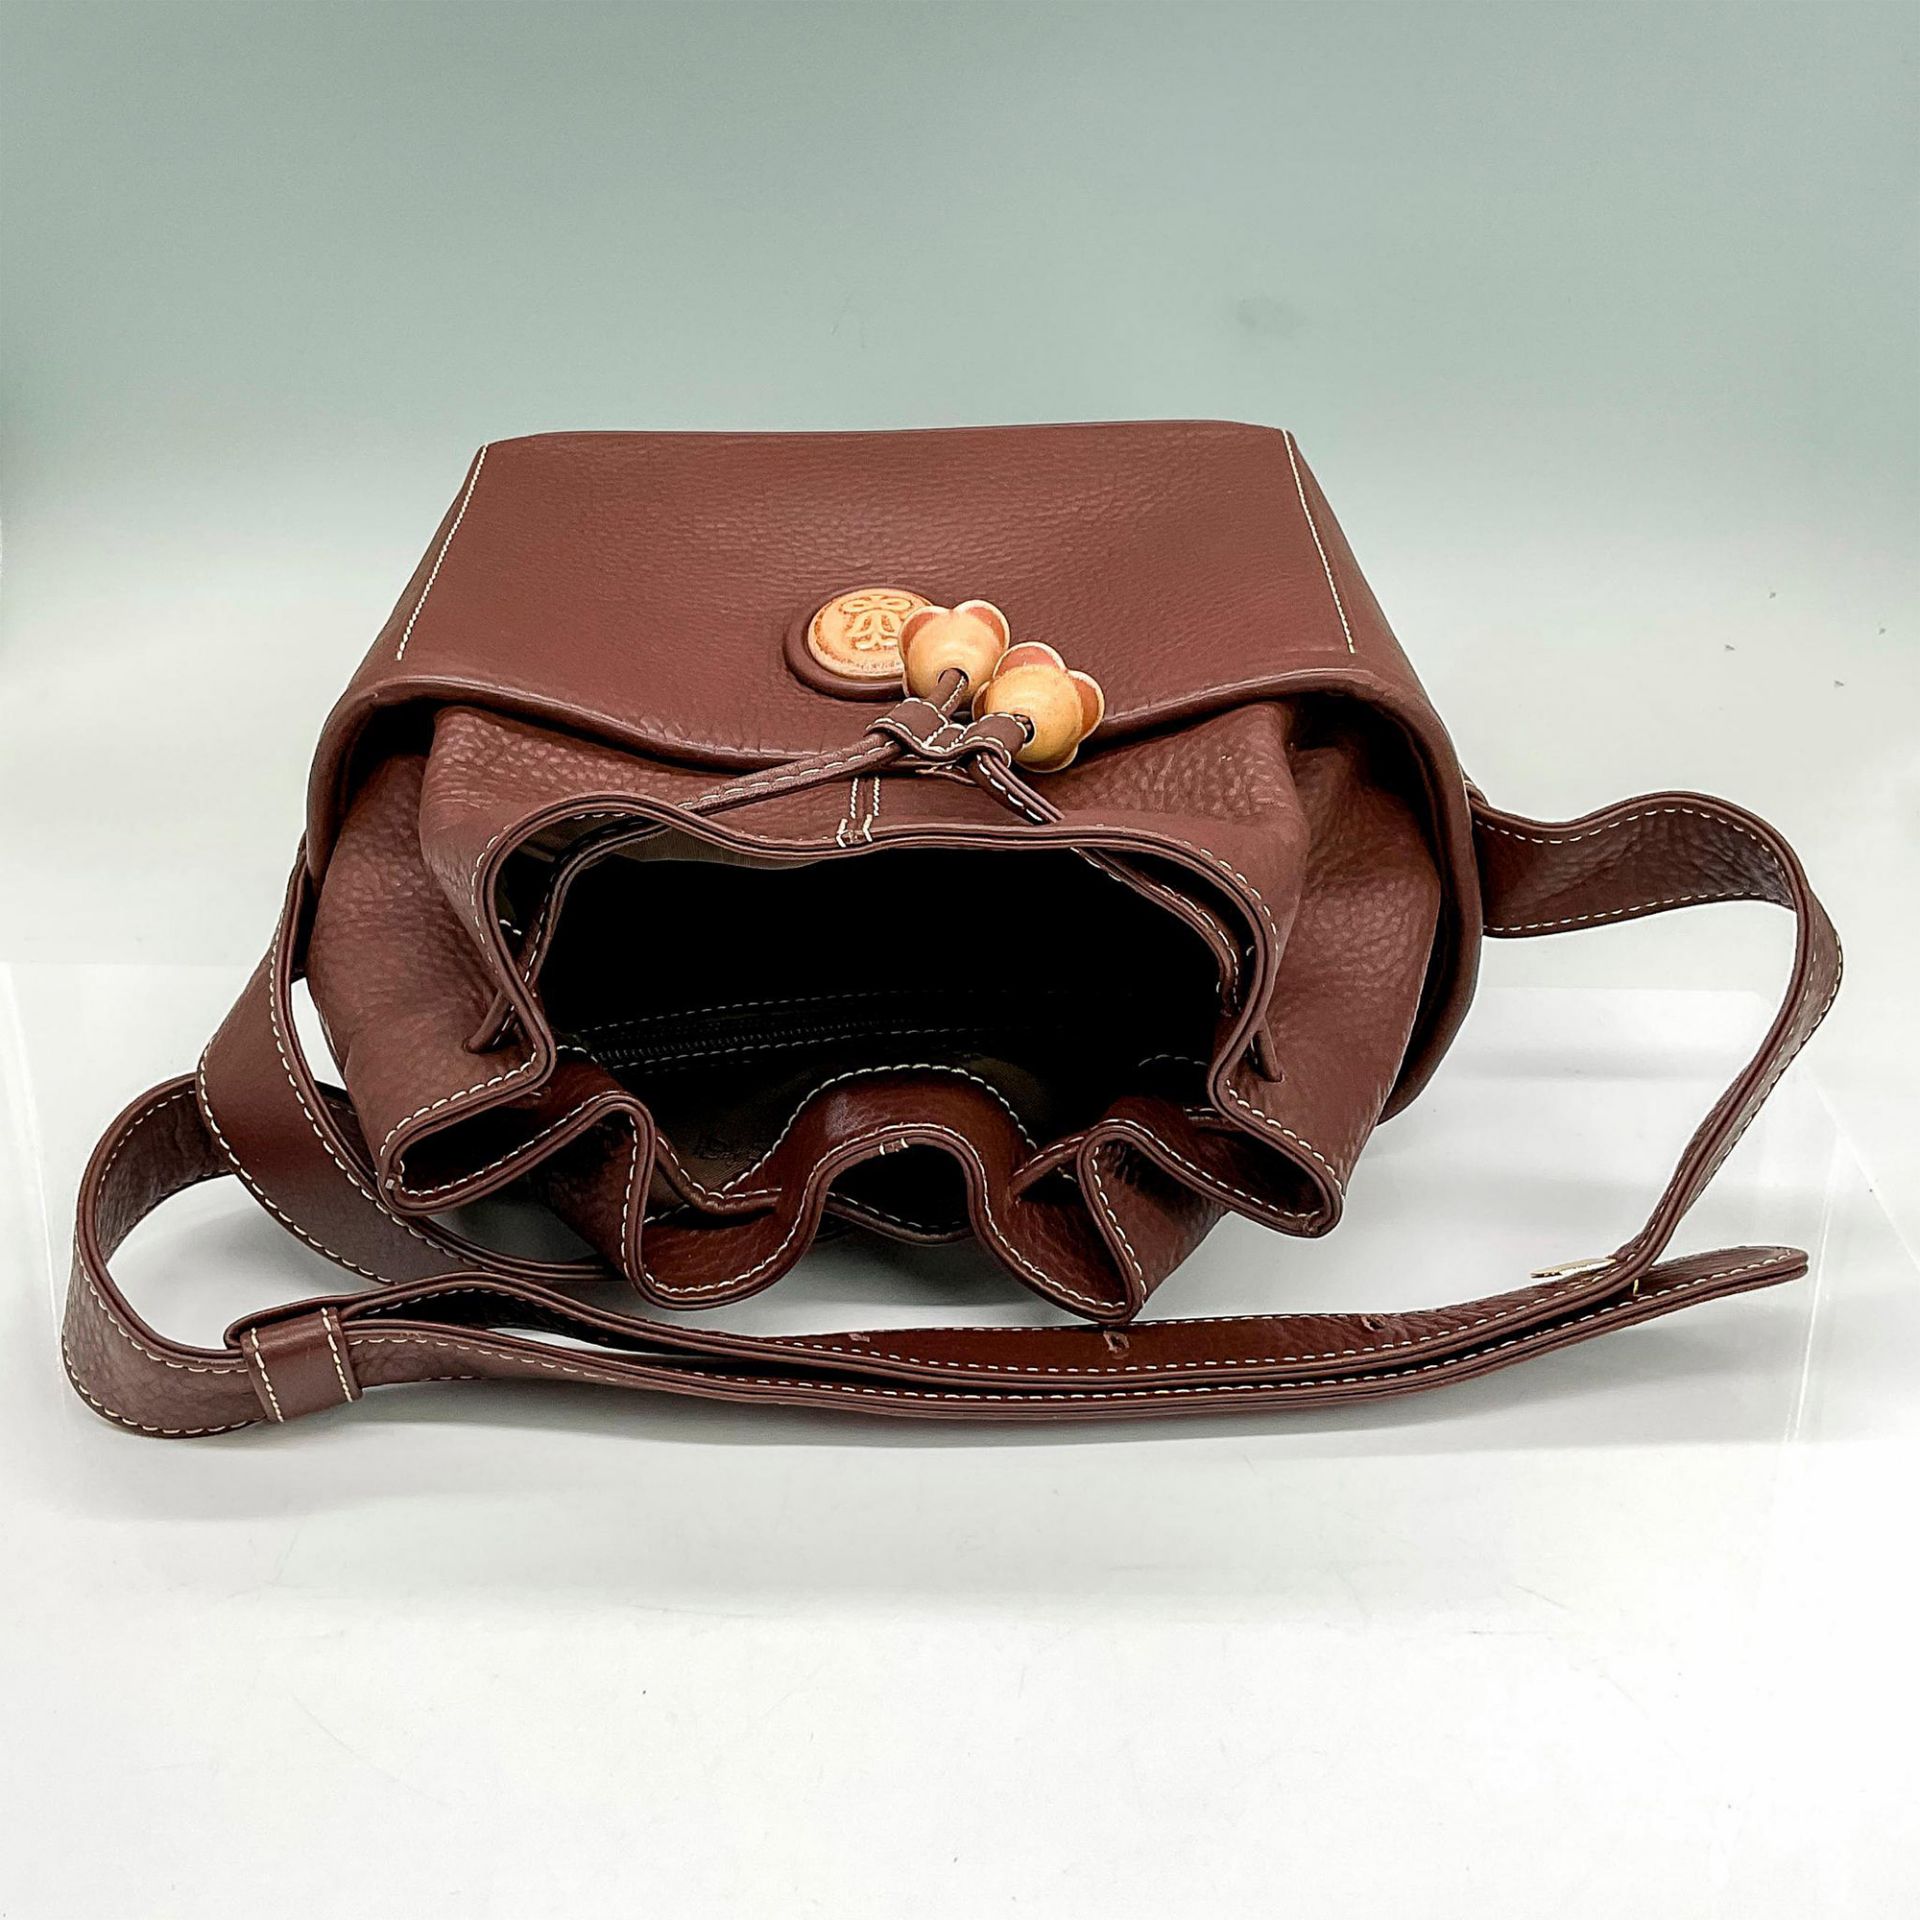 Lladro Brown Leather Handbag With Porcelain Accents - Image 4 of 6